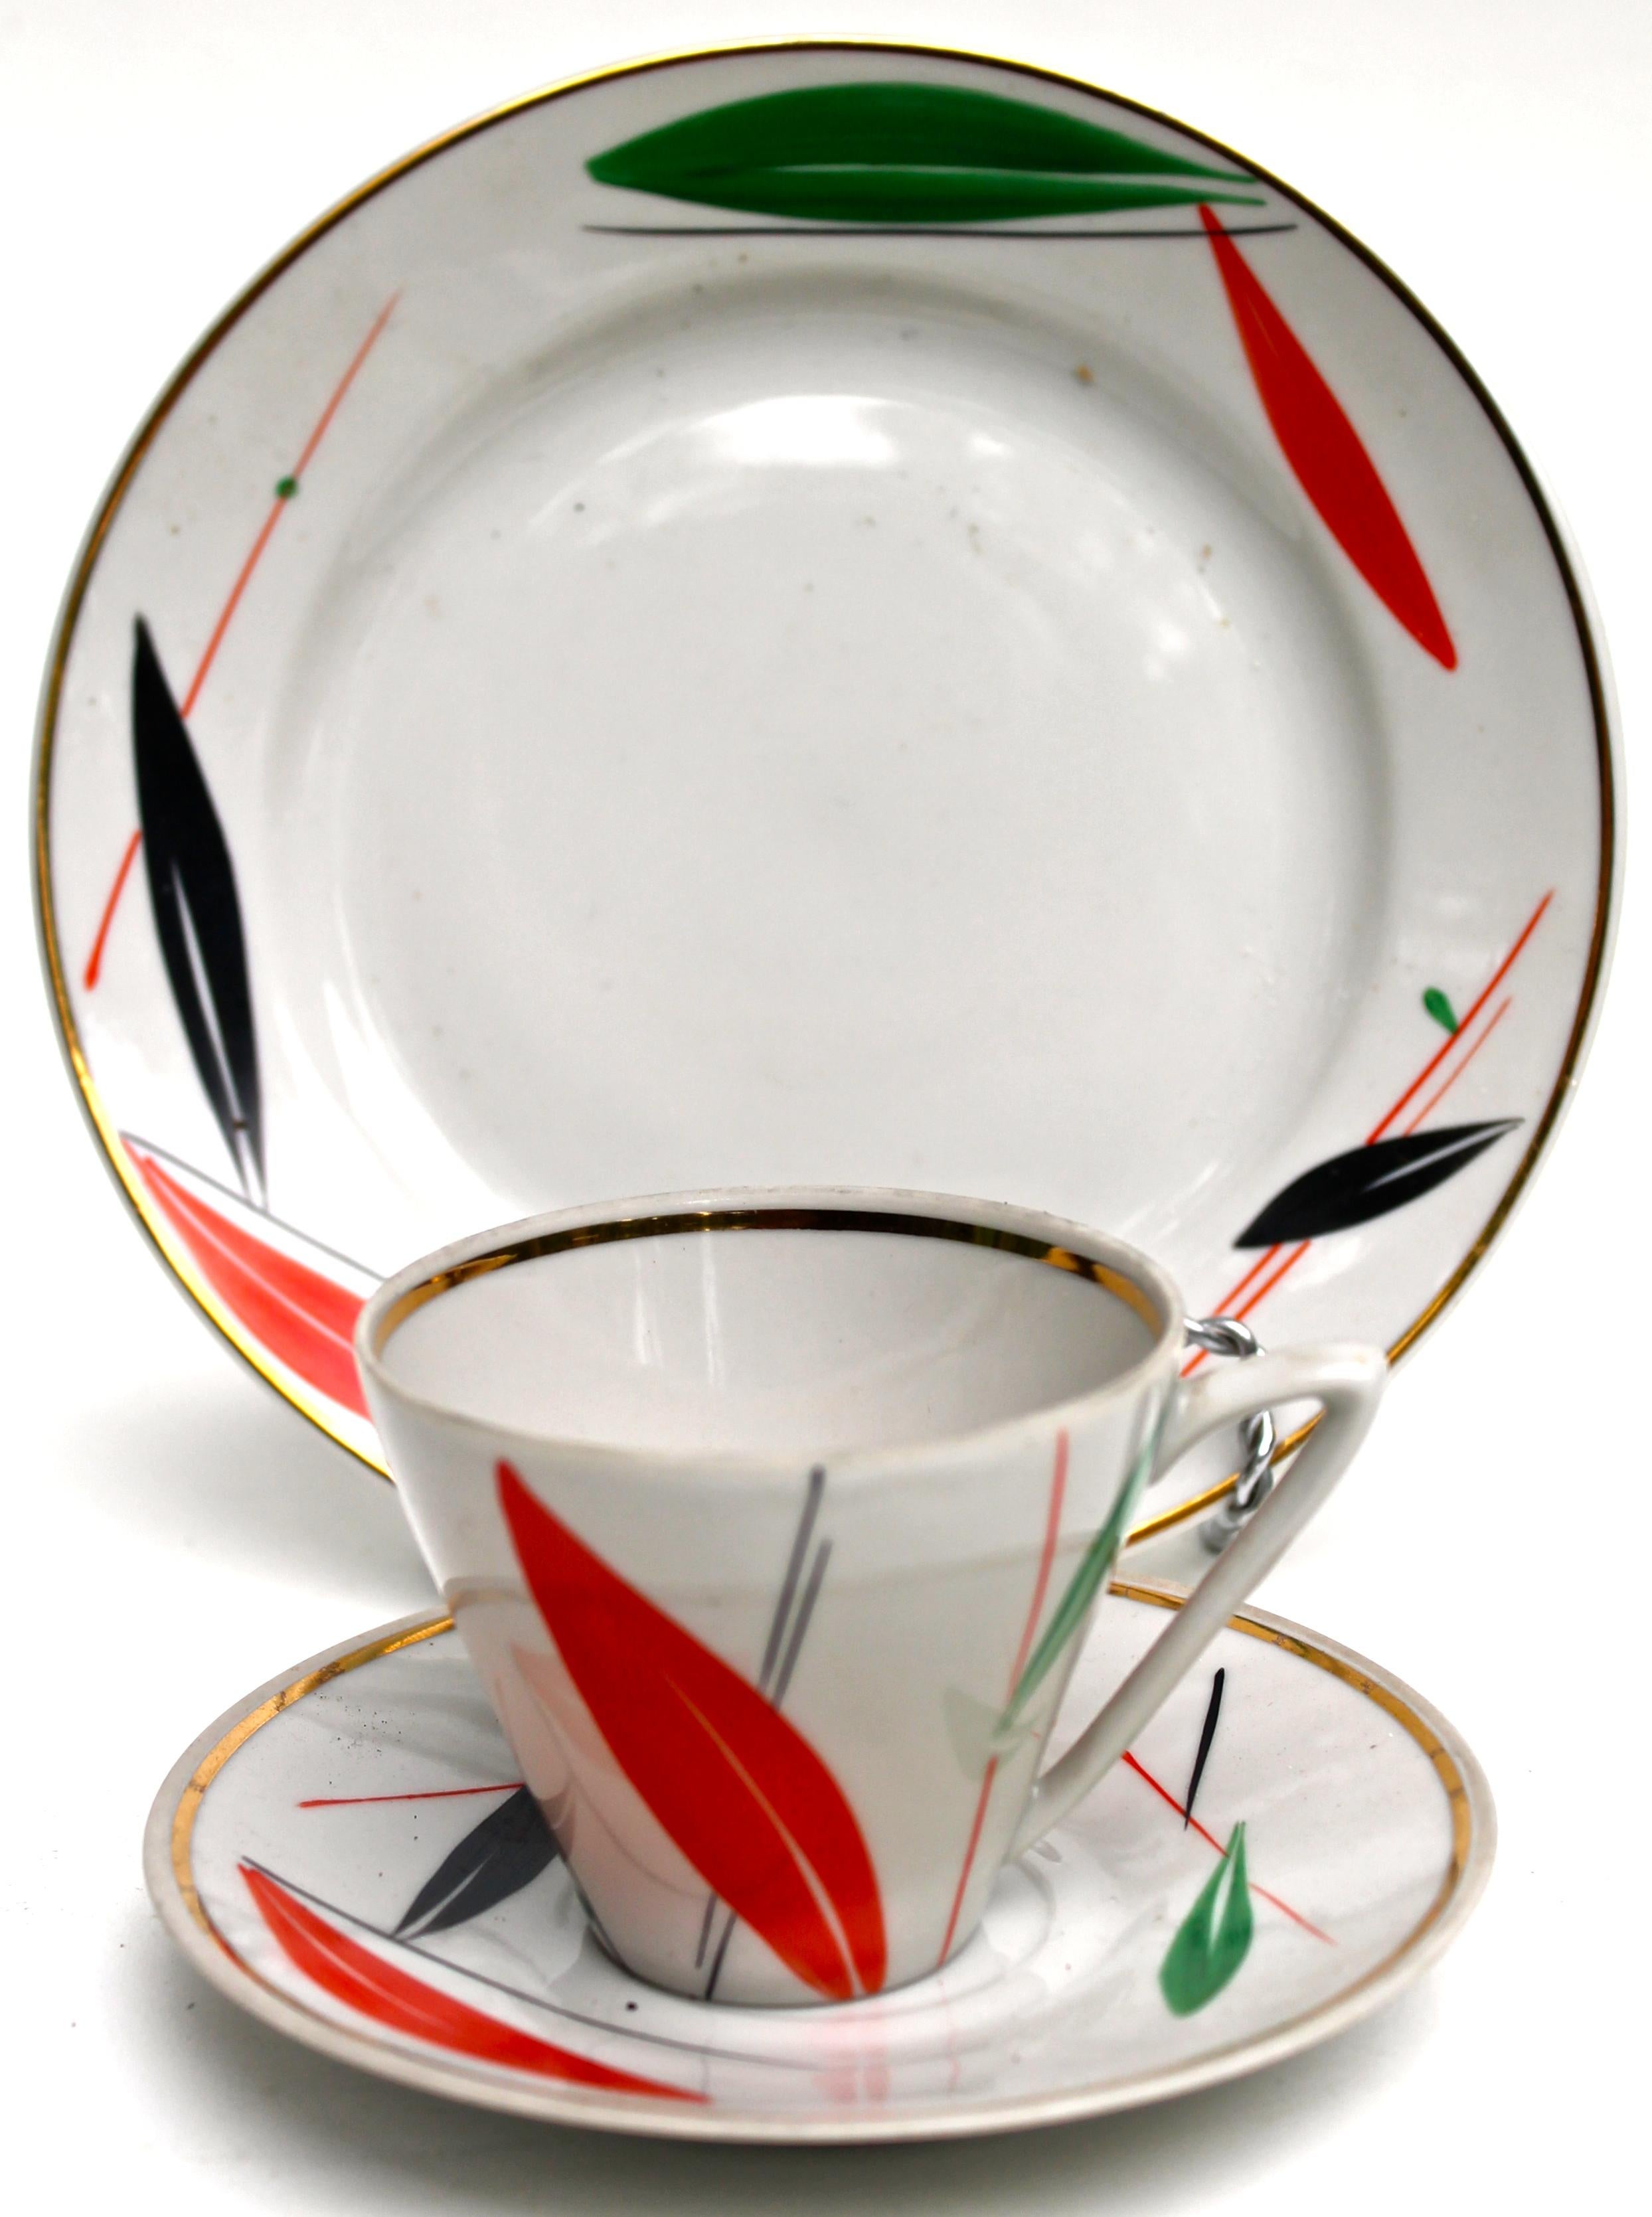 All hand painted and signed made in Soviet Ukraine. Cup is 5.8cm high, saucer 12cm diameter and the dessert 17cm. diameter.